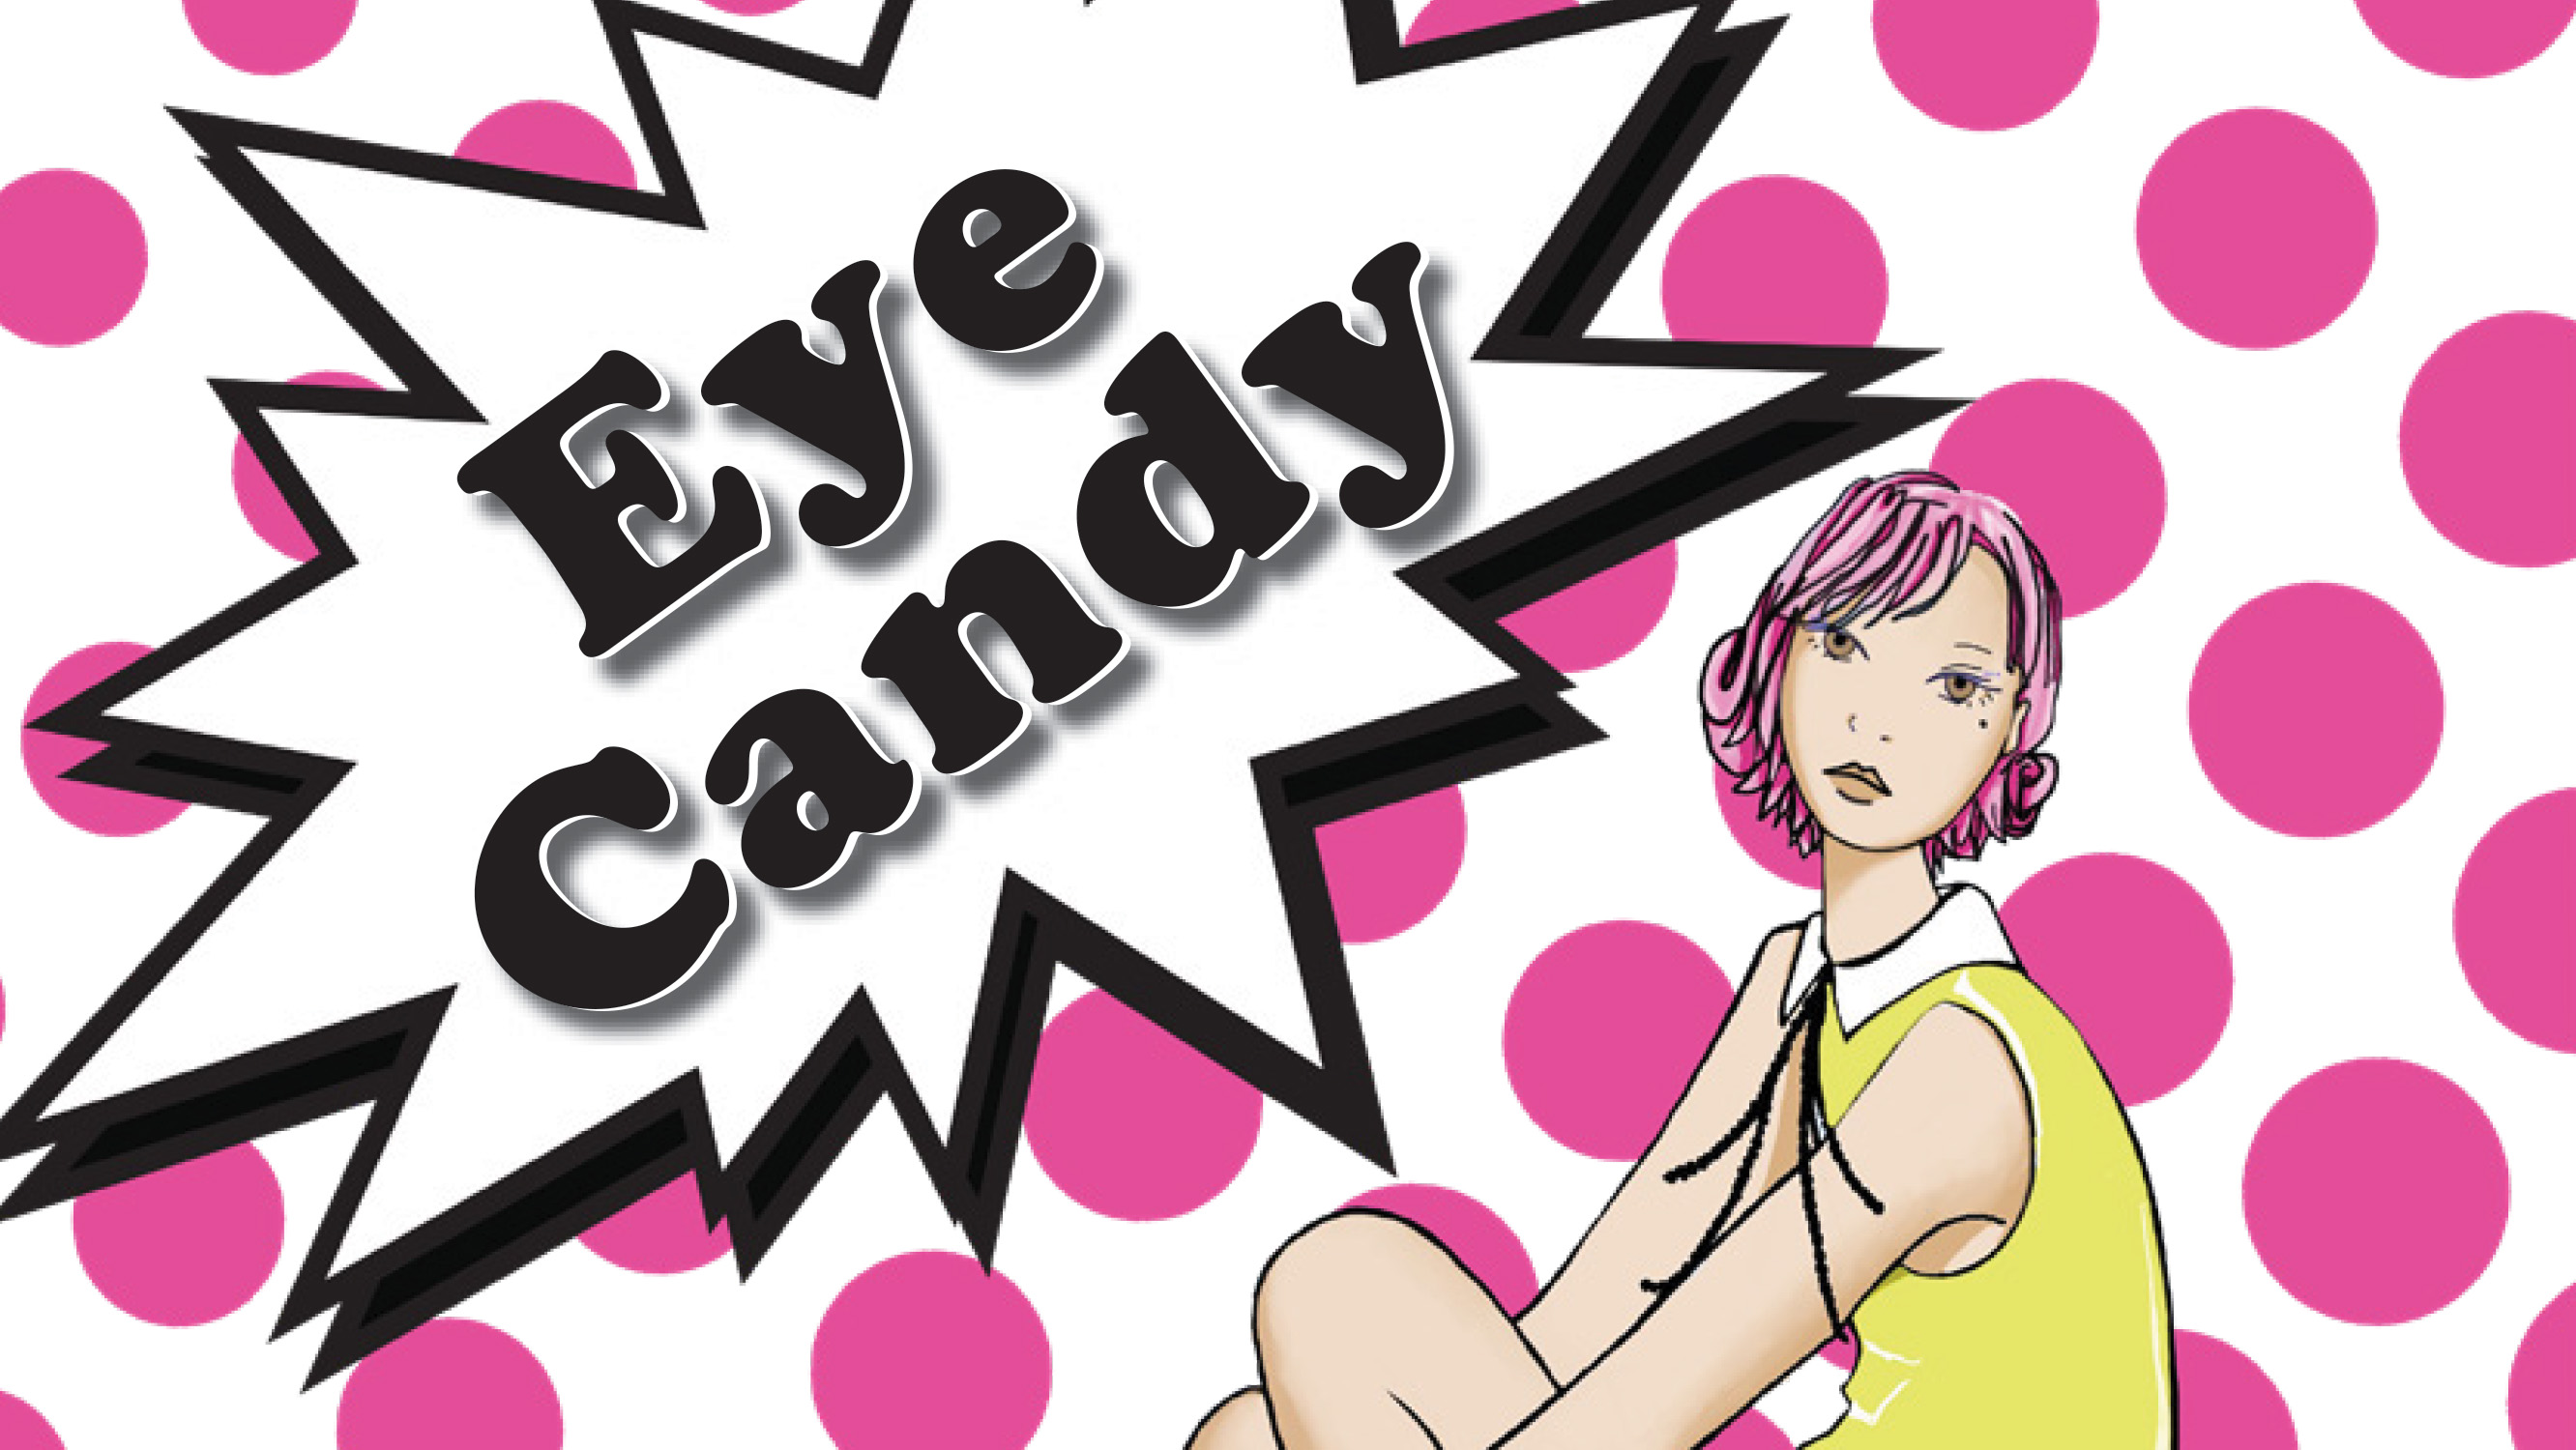 An illustration of a girl sitting in front of a pink polka dot background with the words Eye Candy overlaid